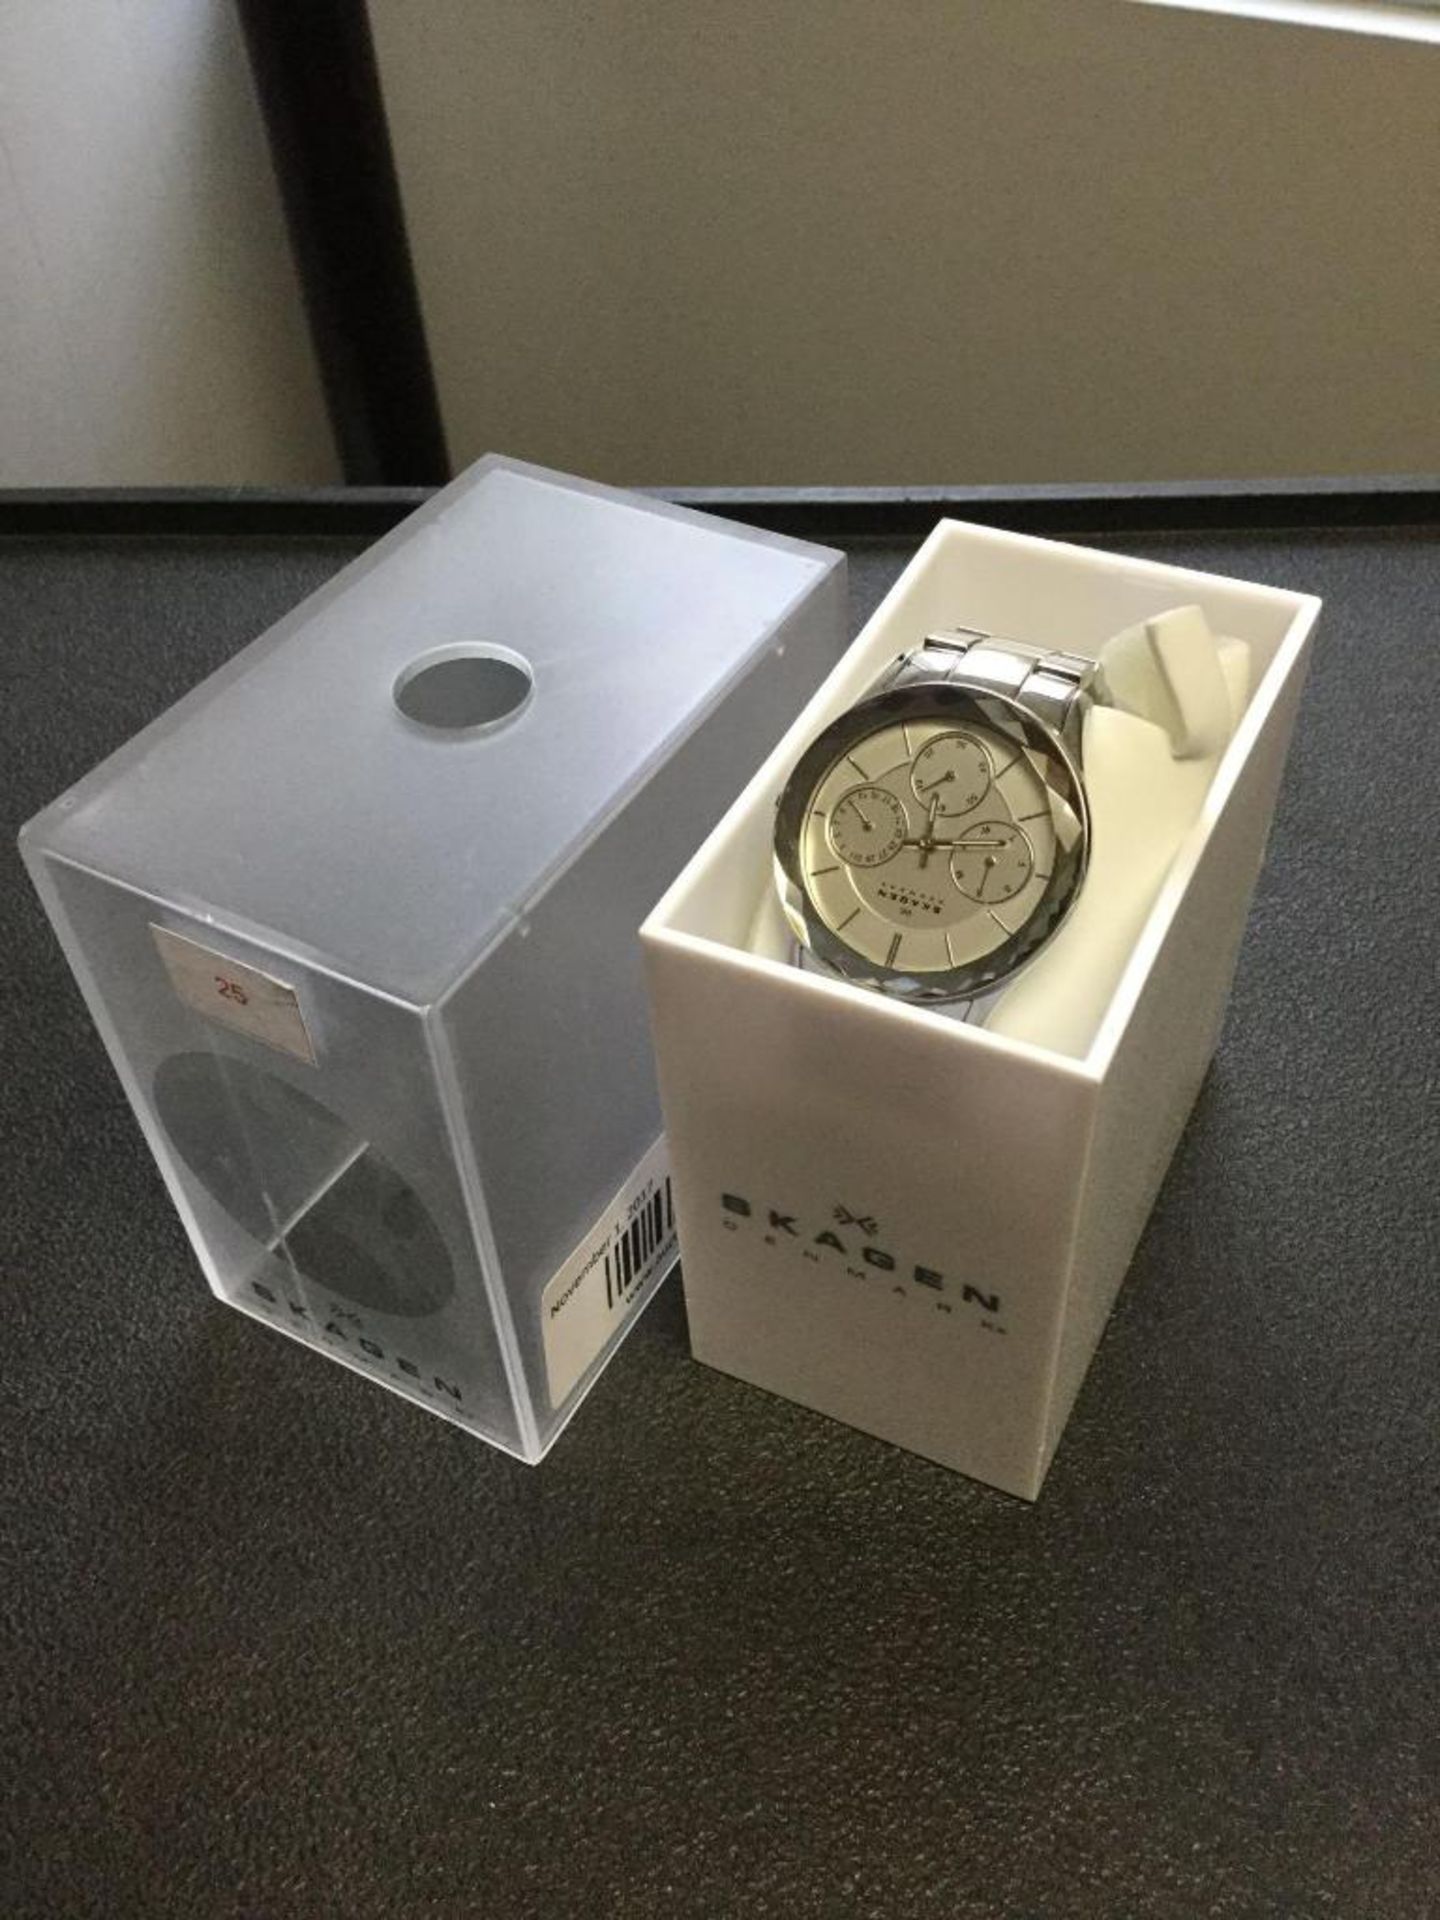 Skagen Denmark Watch Silver face and band with box - Image 2 of 4